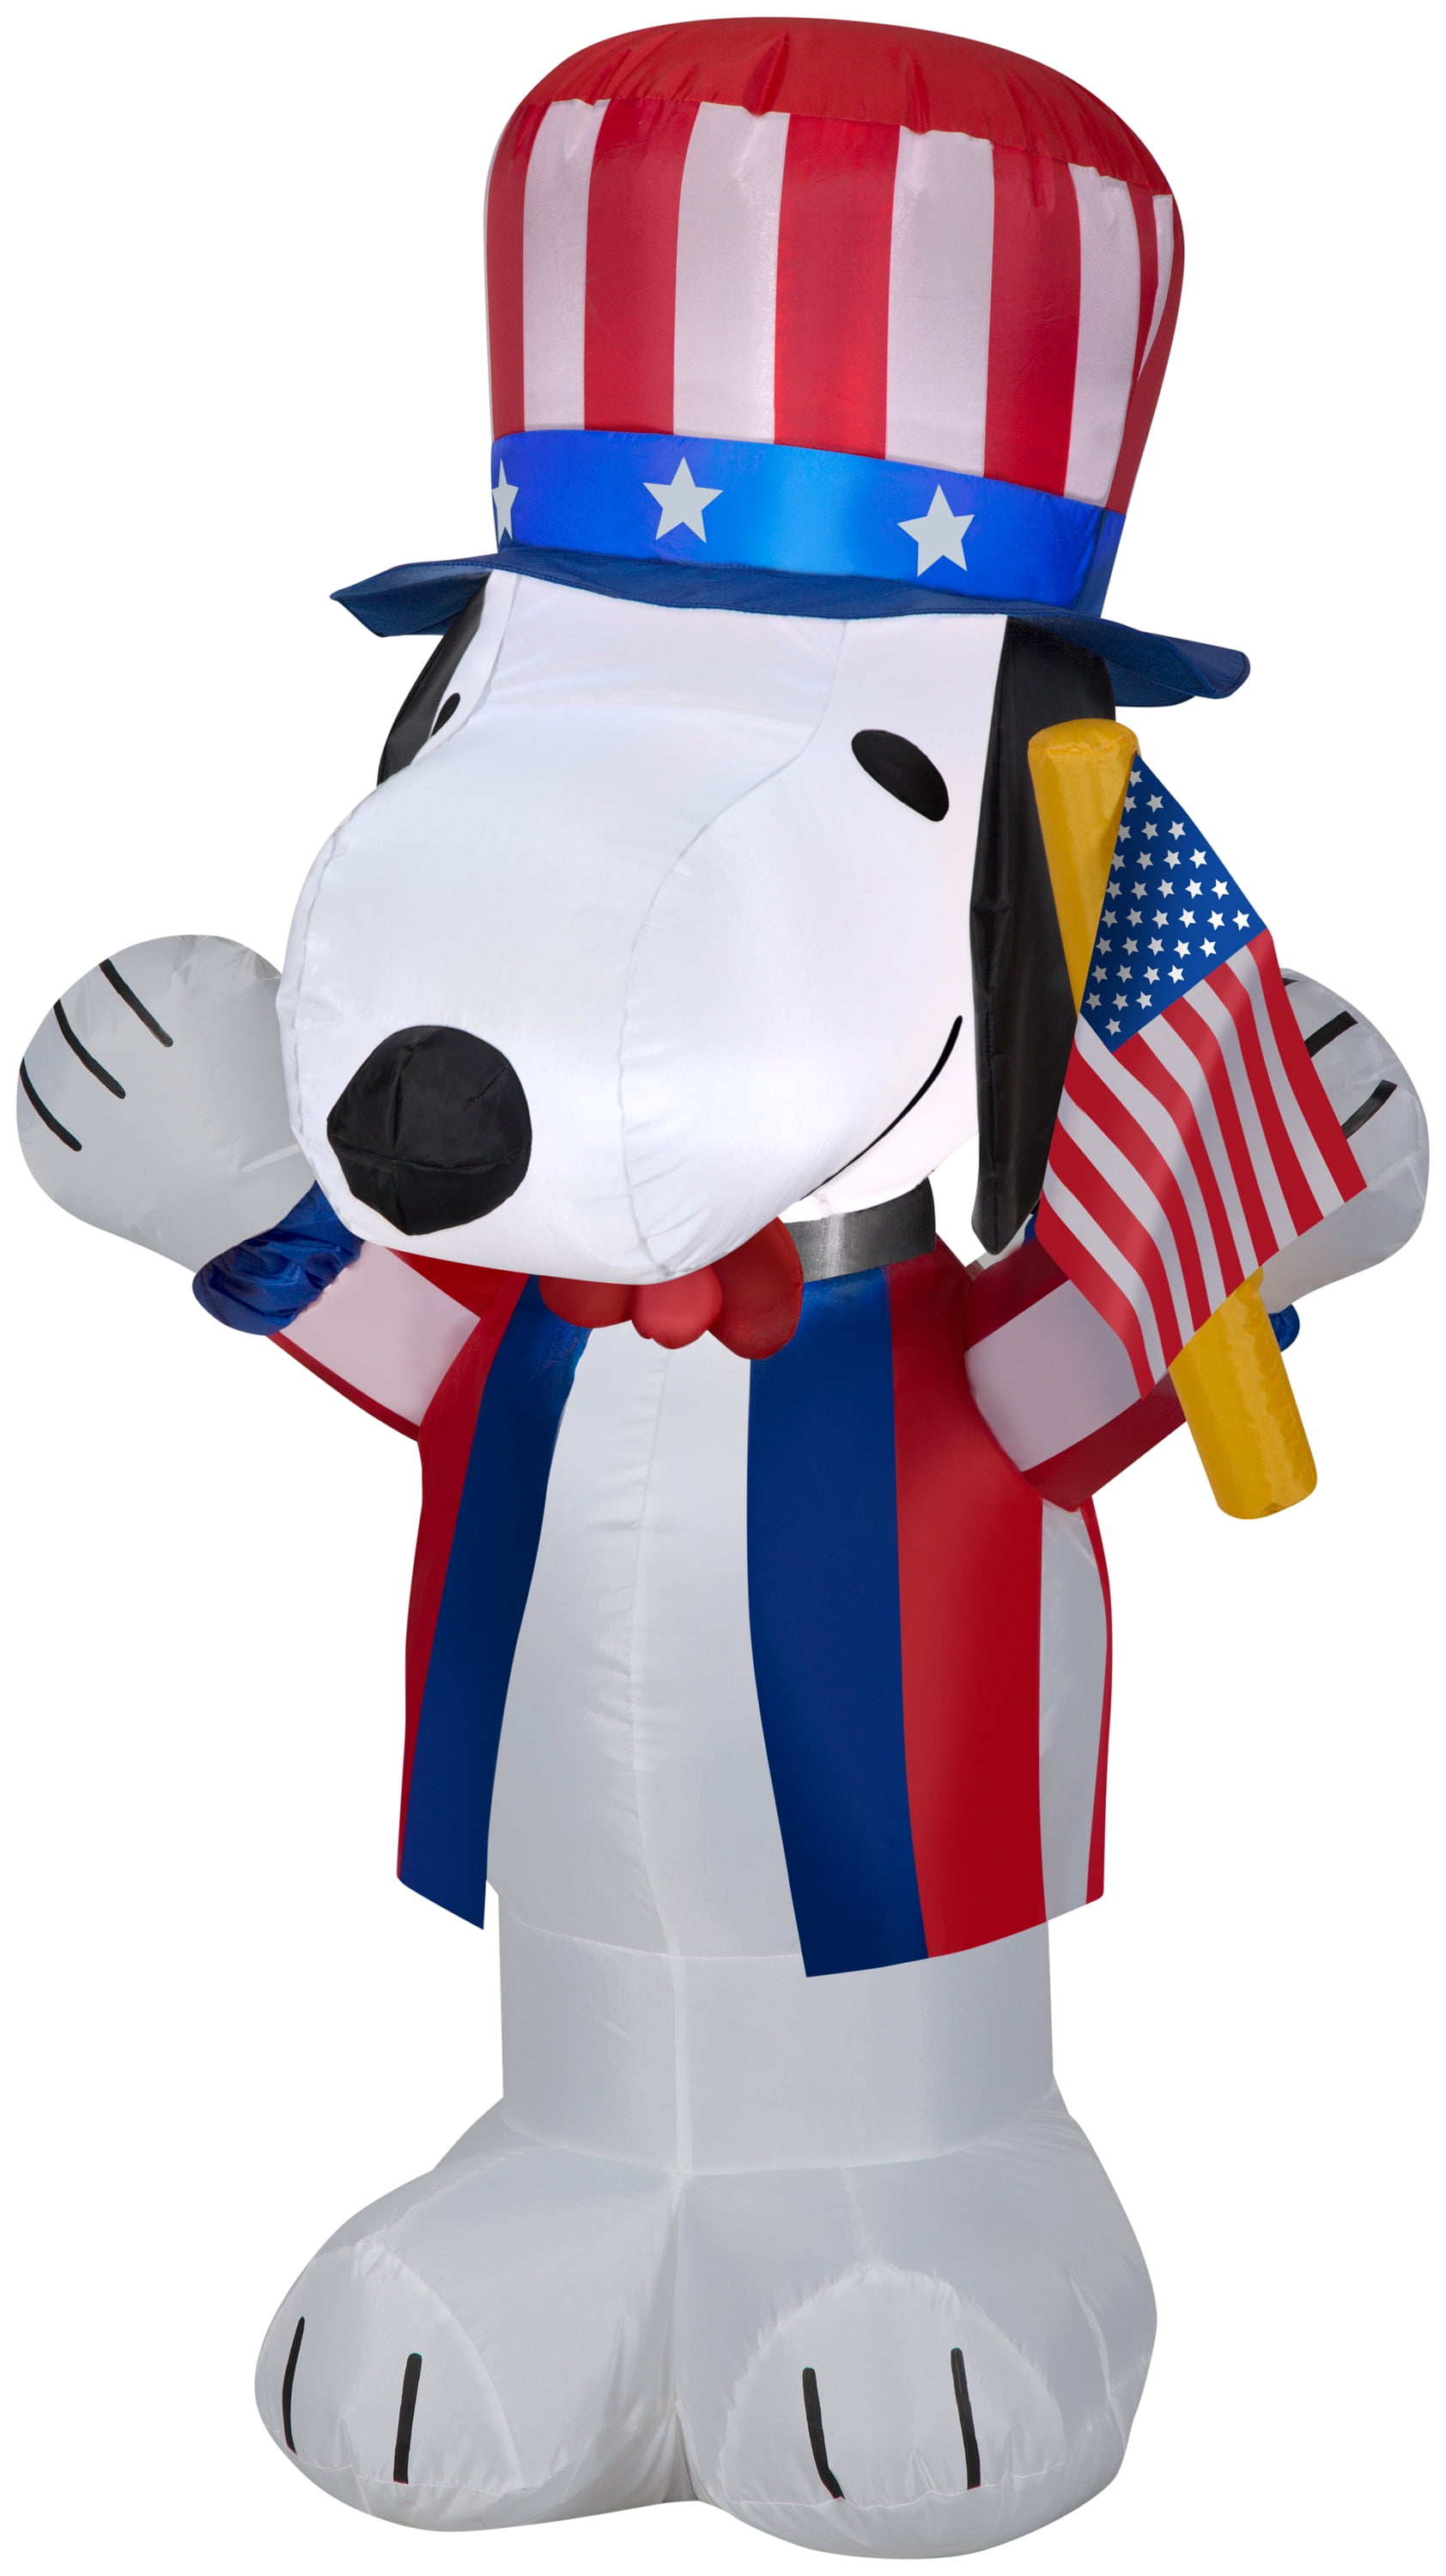 4-foot Tall Gemmy Airblown Inflatable Patriotic Uncle Sam with Top Hat July 4th Life Sized Decoration